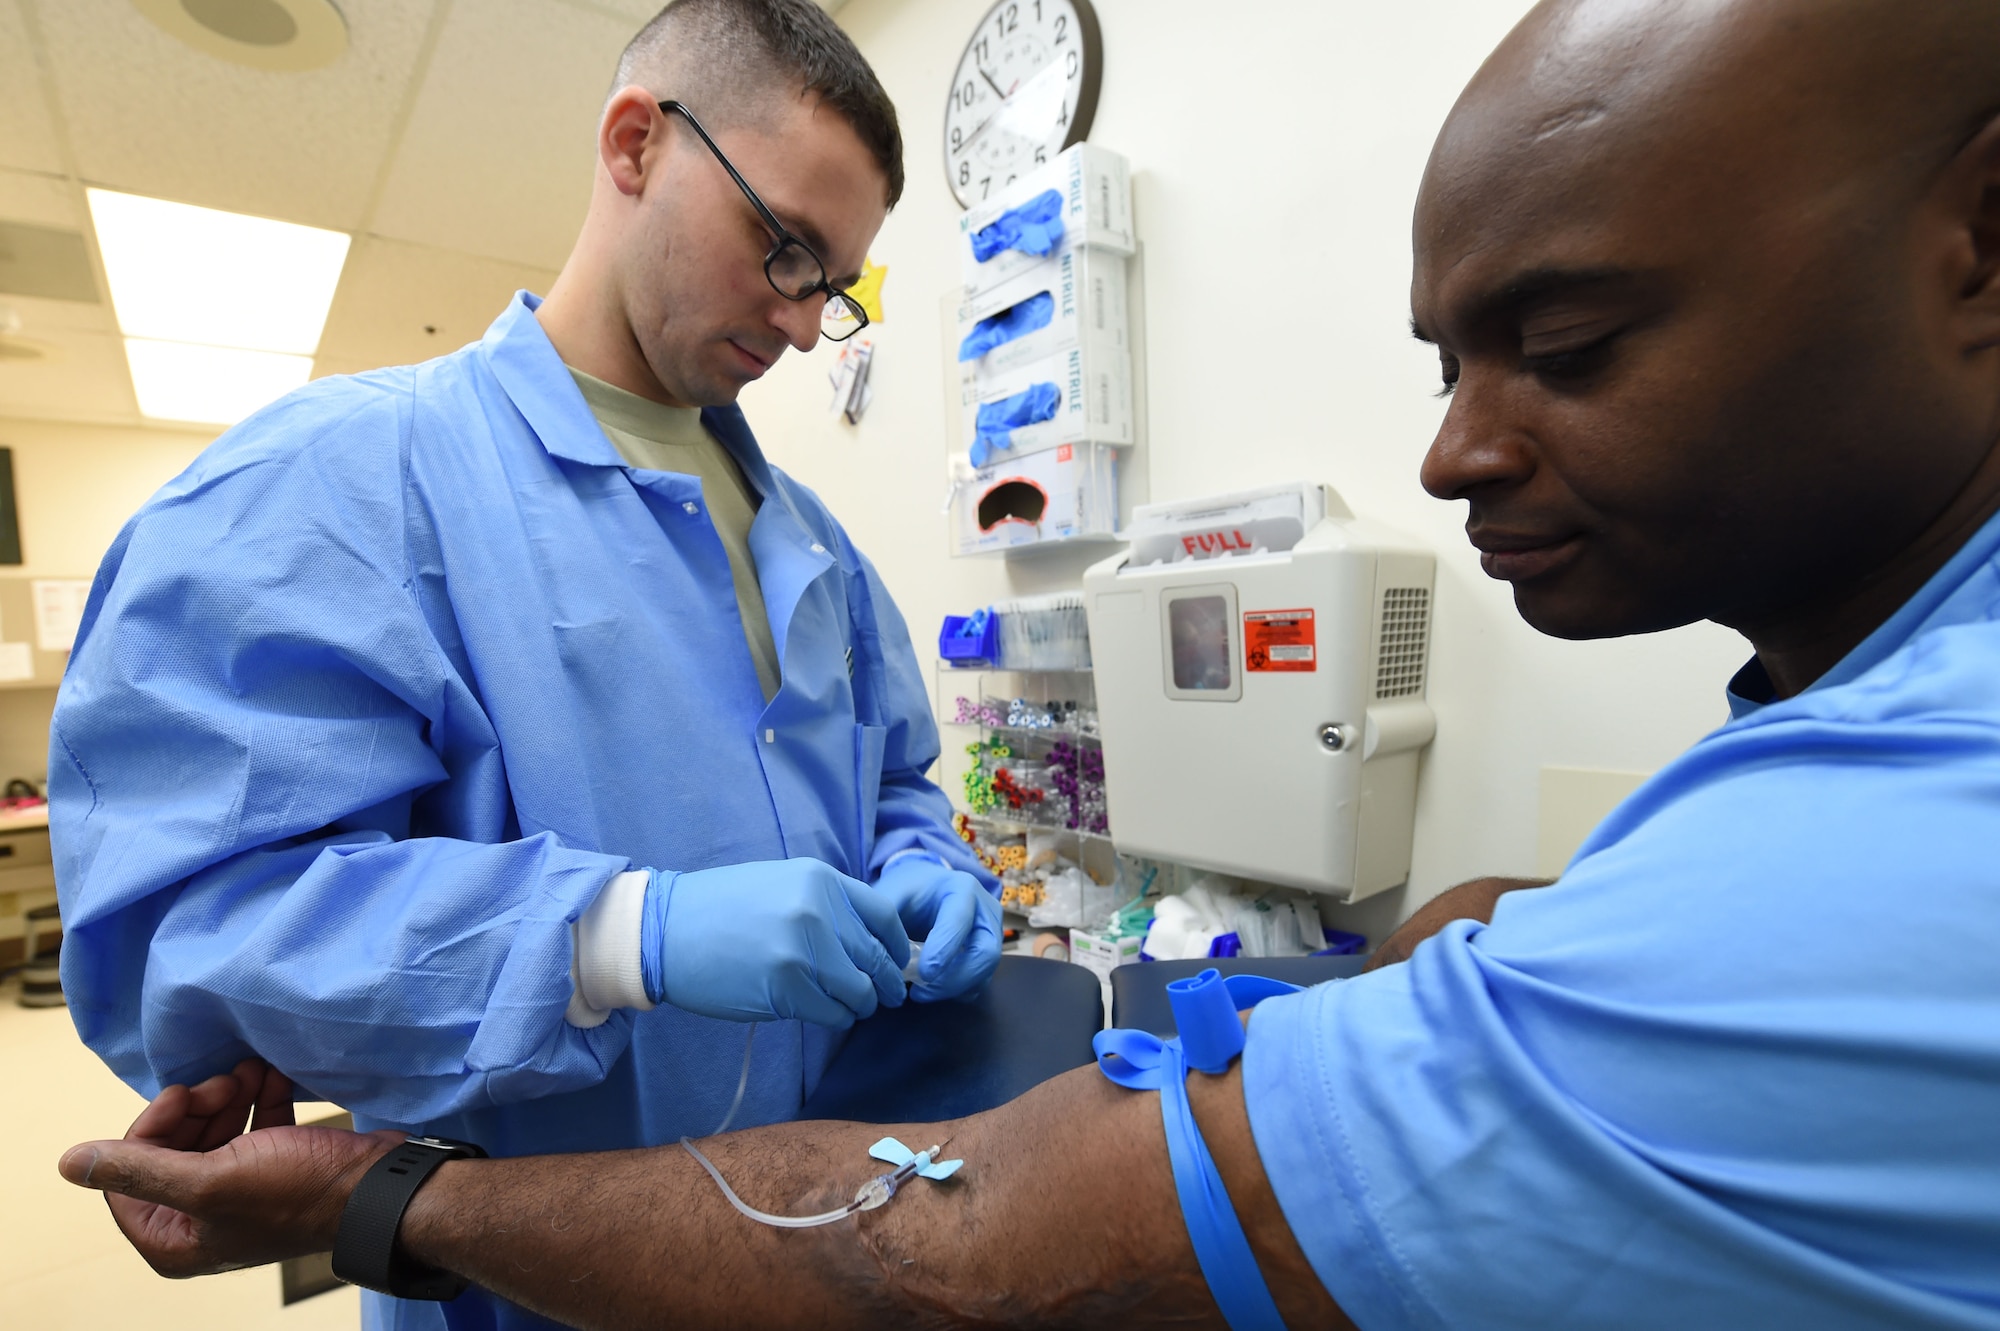 Staff Sgt. Donald Chapman, 359th Clinical Laboratory and Radiology Flight medical lab technician, draws a blood sample from a patient at the 359th Medical Group lab at Joint Base San Antonio-Randolph, Texas, Sept. 16, 2016. Regular blood samples, and those ordered by a primary care manager, ensure the health of all military members, dependents, and retirees. (U.S. Air Force photo/Tech. Sgt. Christopher Carwile/Released)